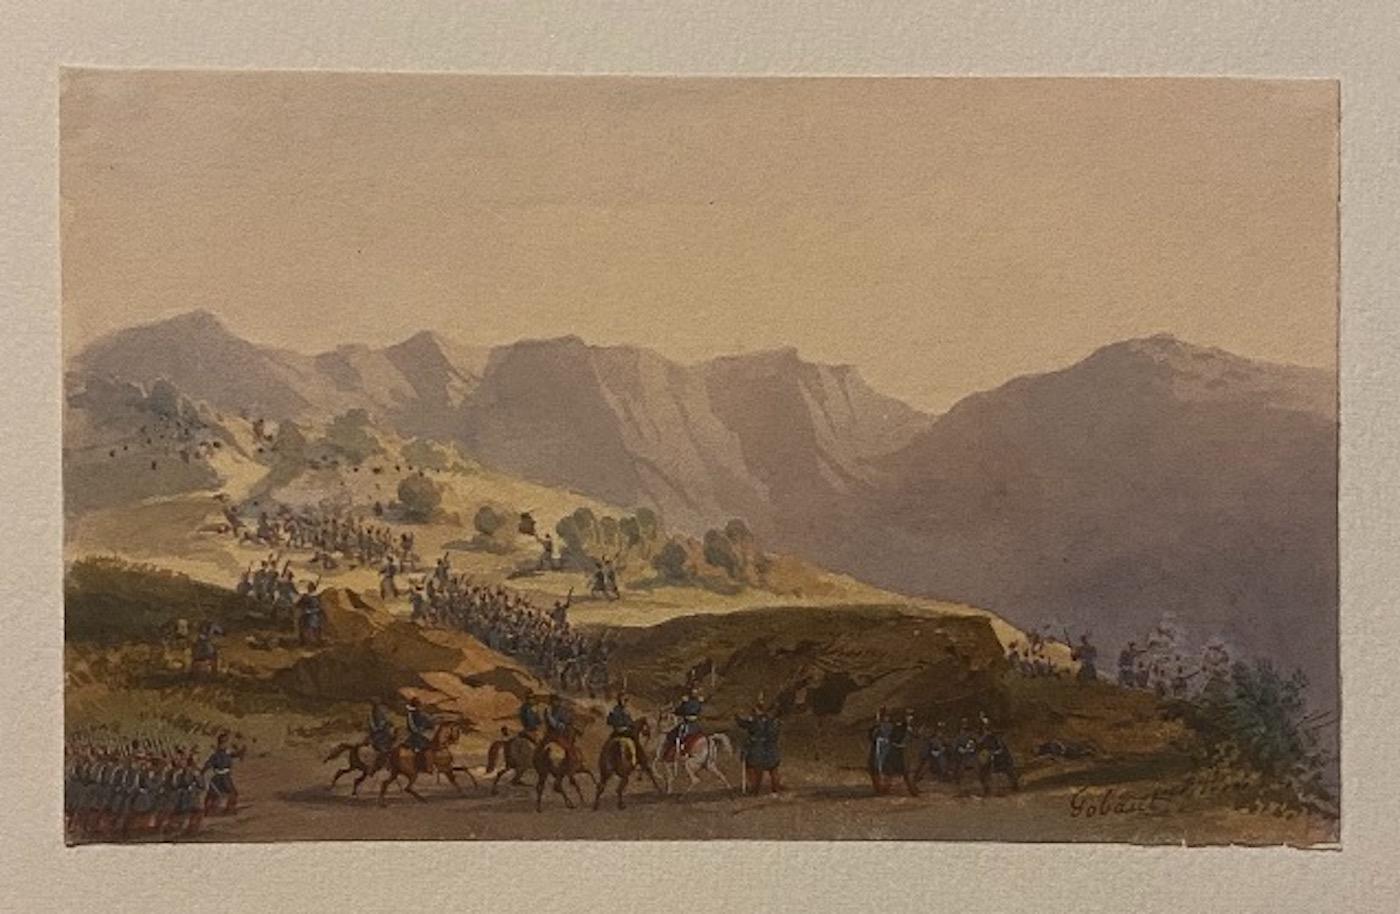 Gobaut Gaspard Figurative Art - Troop Movement - Original Ink and Watercolor by Gaspard Gobaut - 19th Century